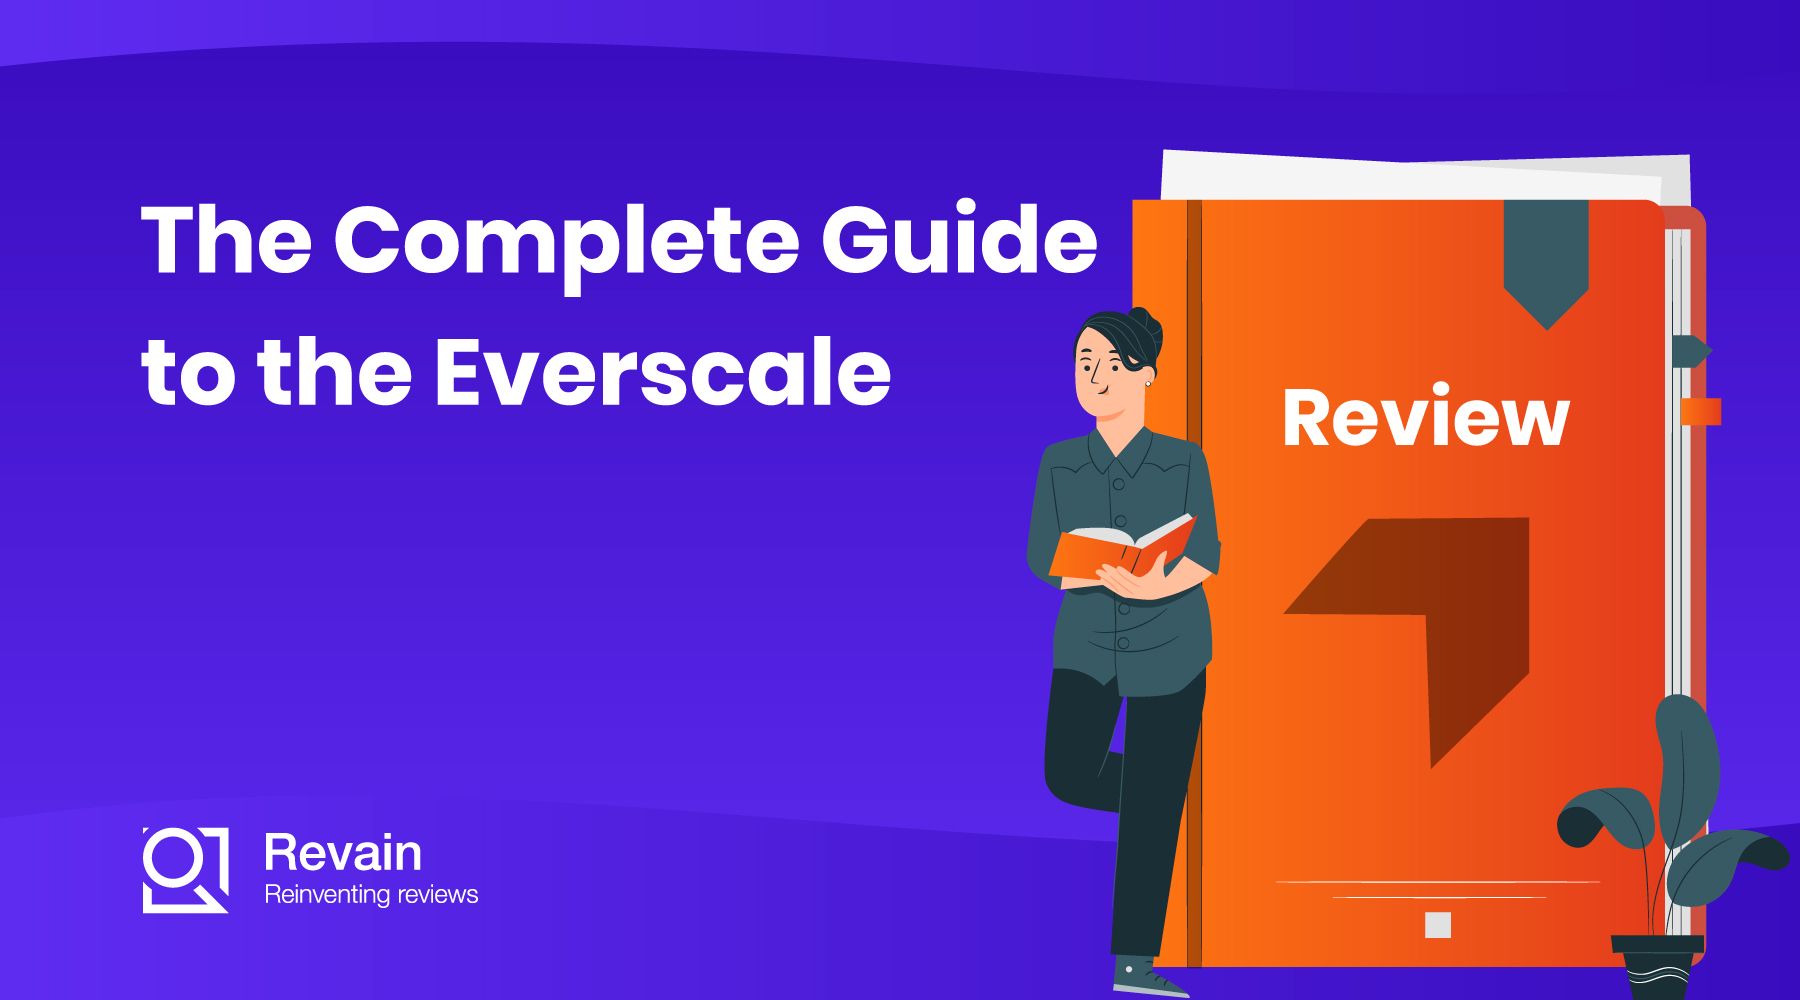 The Complete Guide to the Everscale